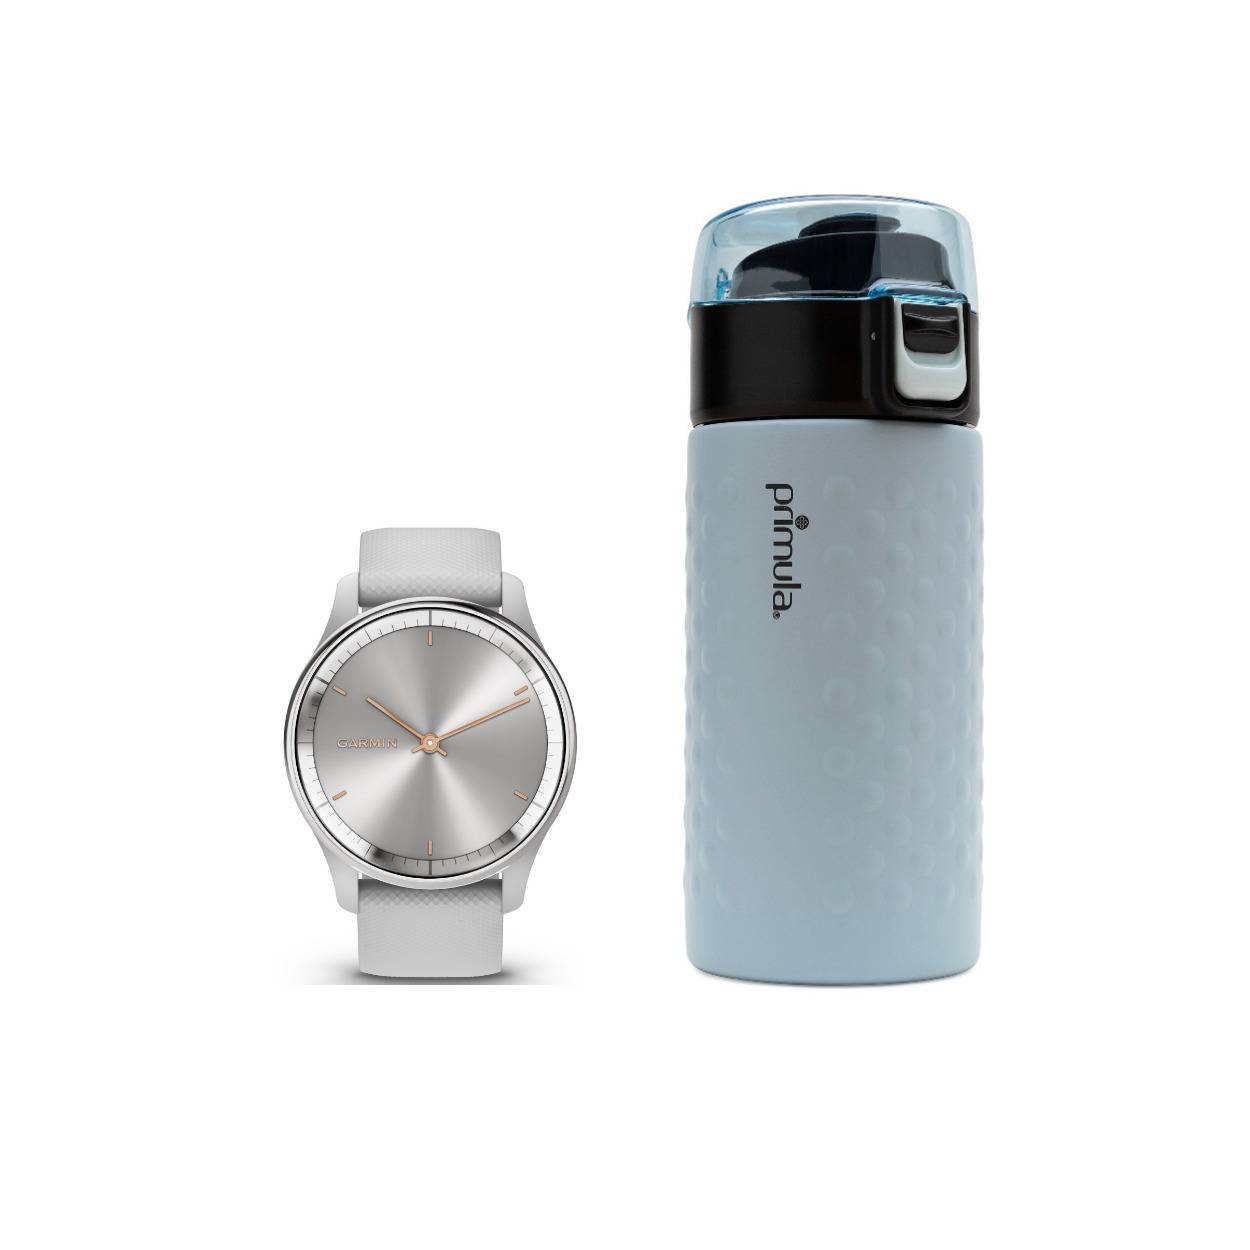 Garmin Vívomove Trend Hybrid Smartwatch (Silver/Stainless Steel) with 12-Ounce Steel Tumbler